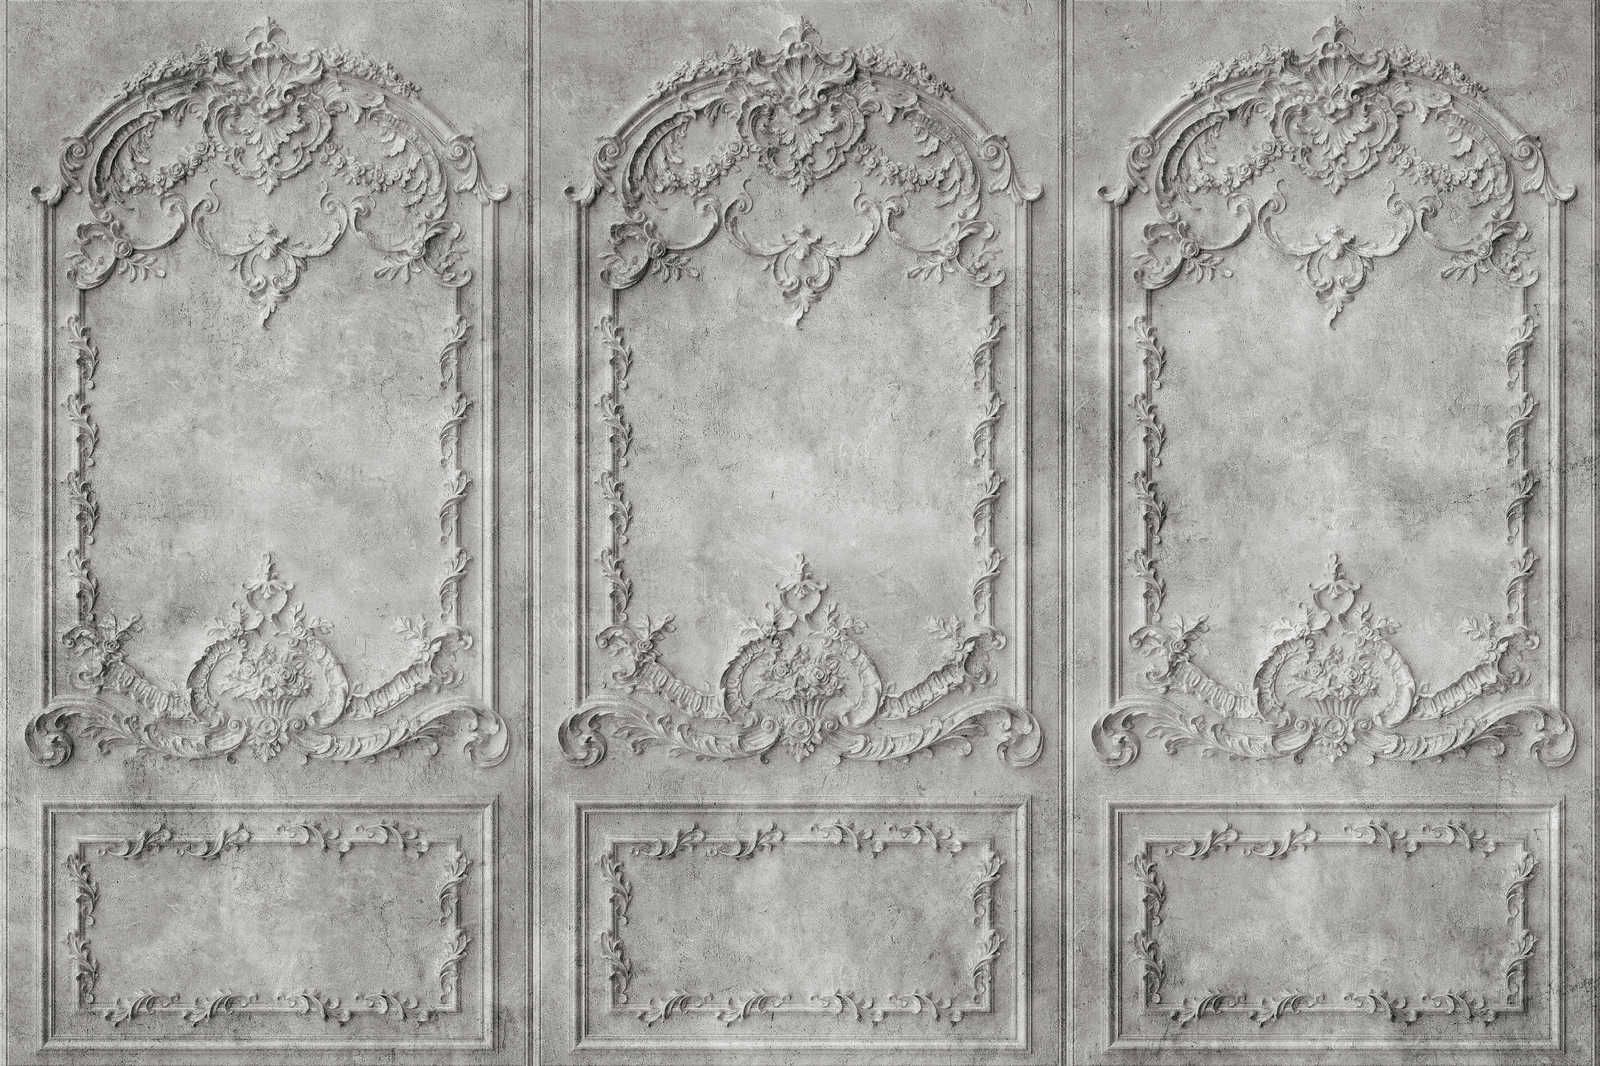             Versailles 2 - Canvas painting Wooden panels Grey in Baroque style - 1.20 m x 0.80 m
        